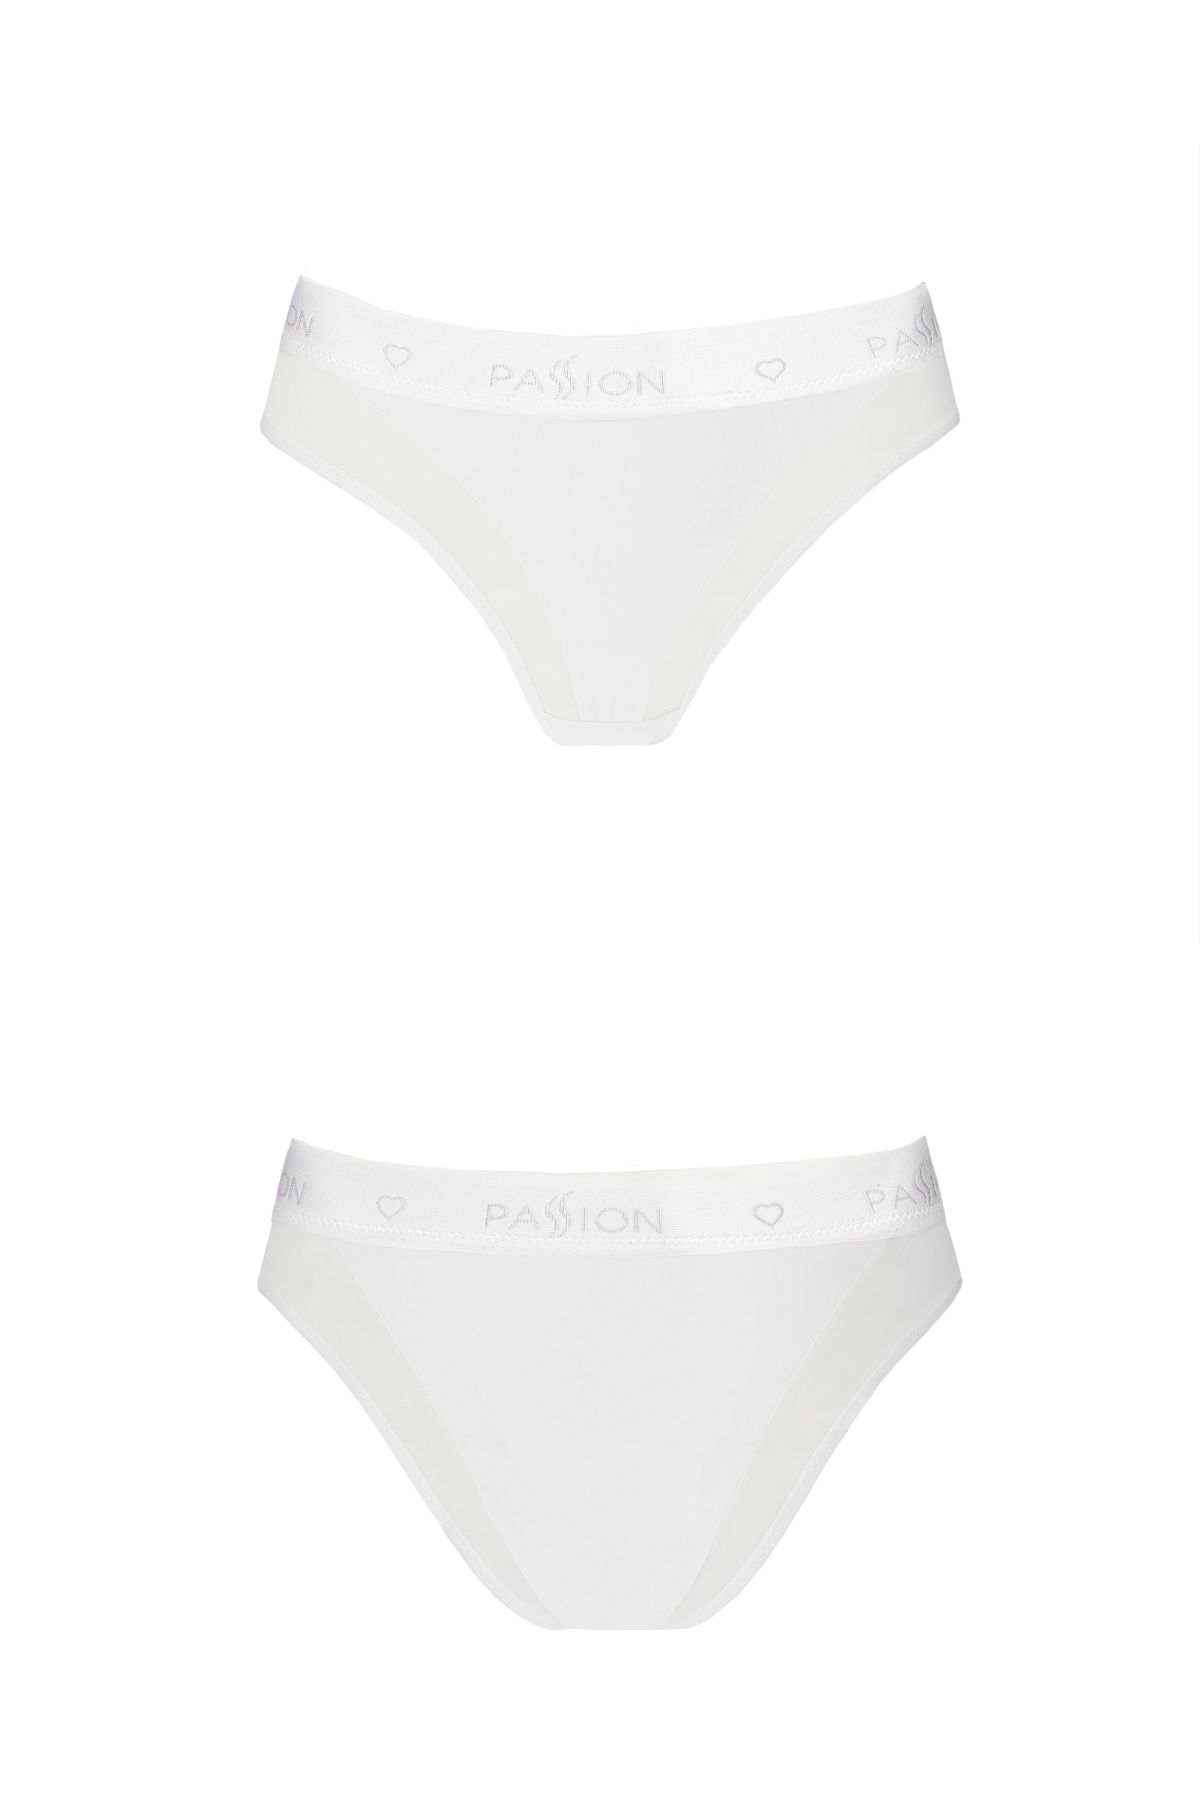     Passion PS002 PANTIES white, size S